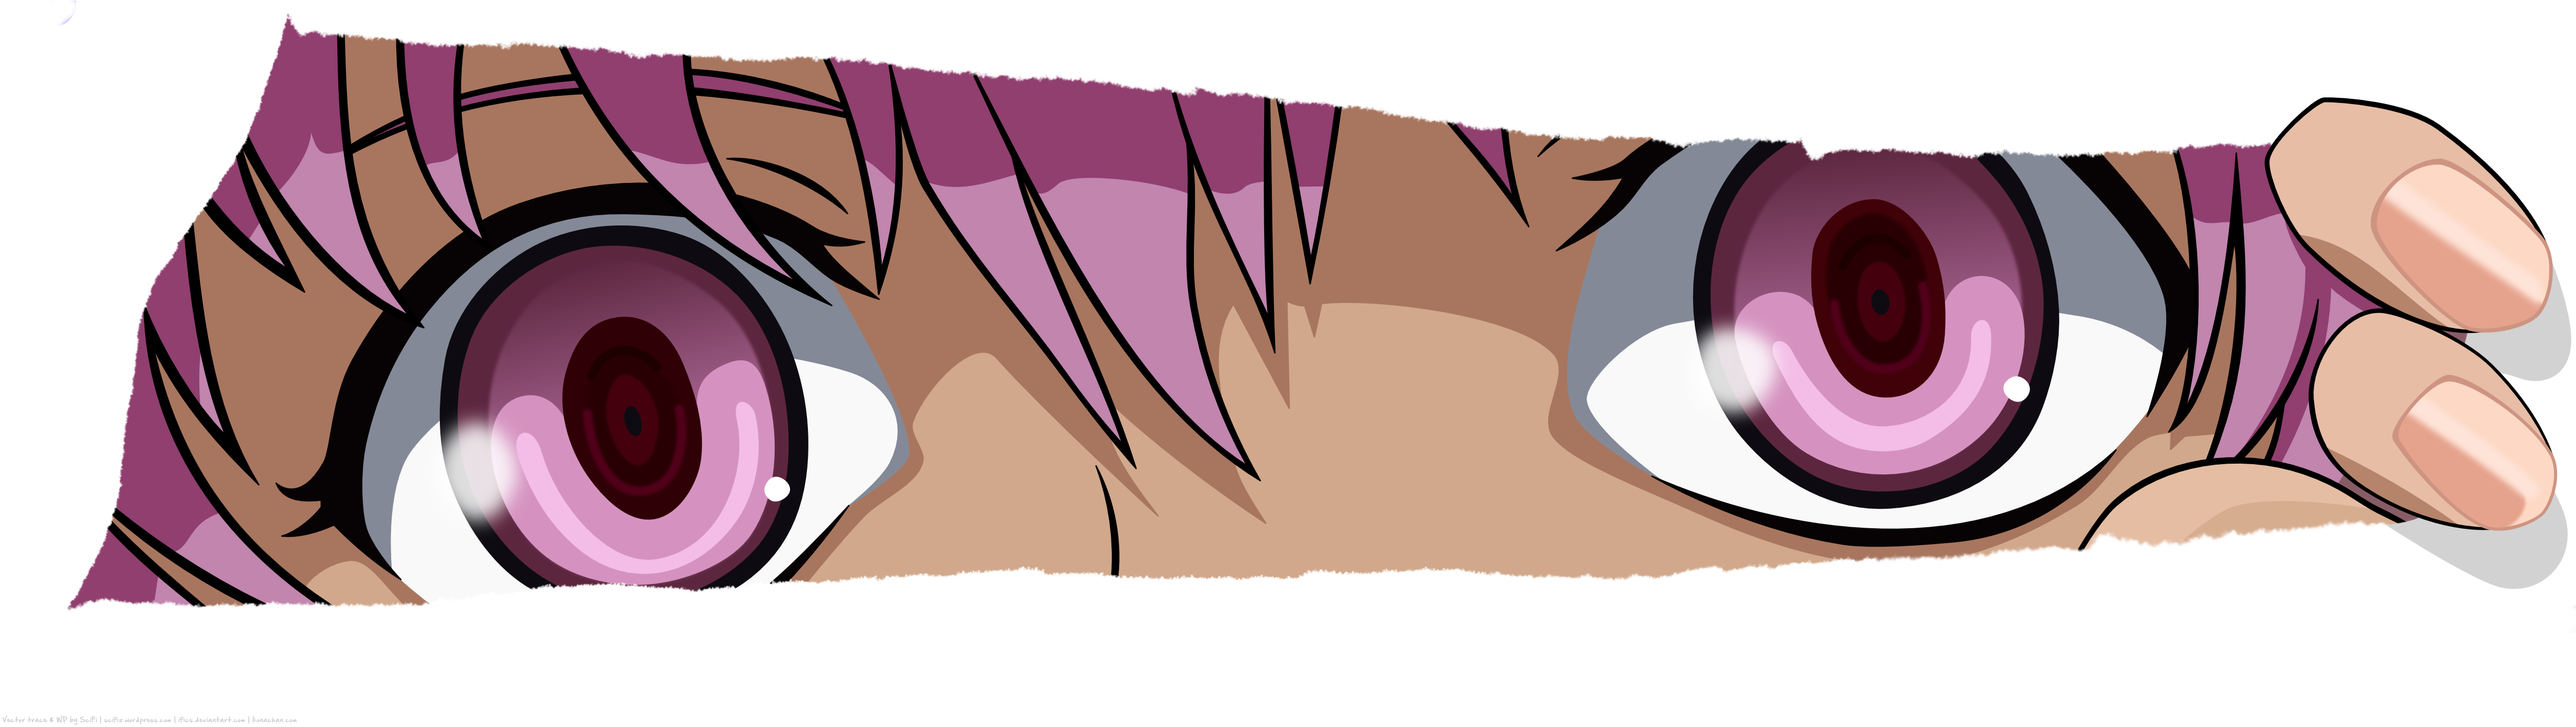 Download Png - Psycho Anime Characters Png (5120x1600)